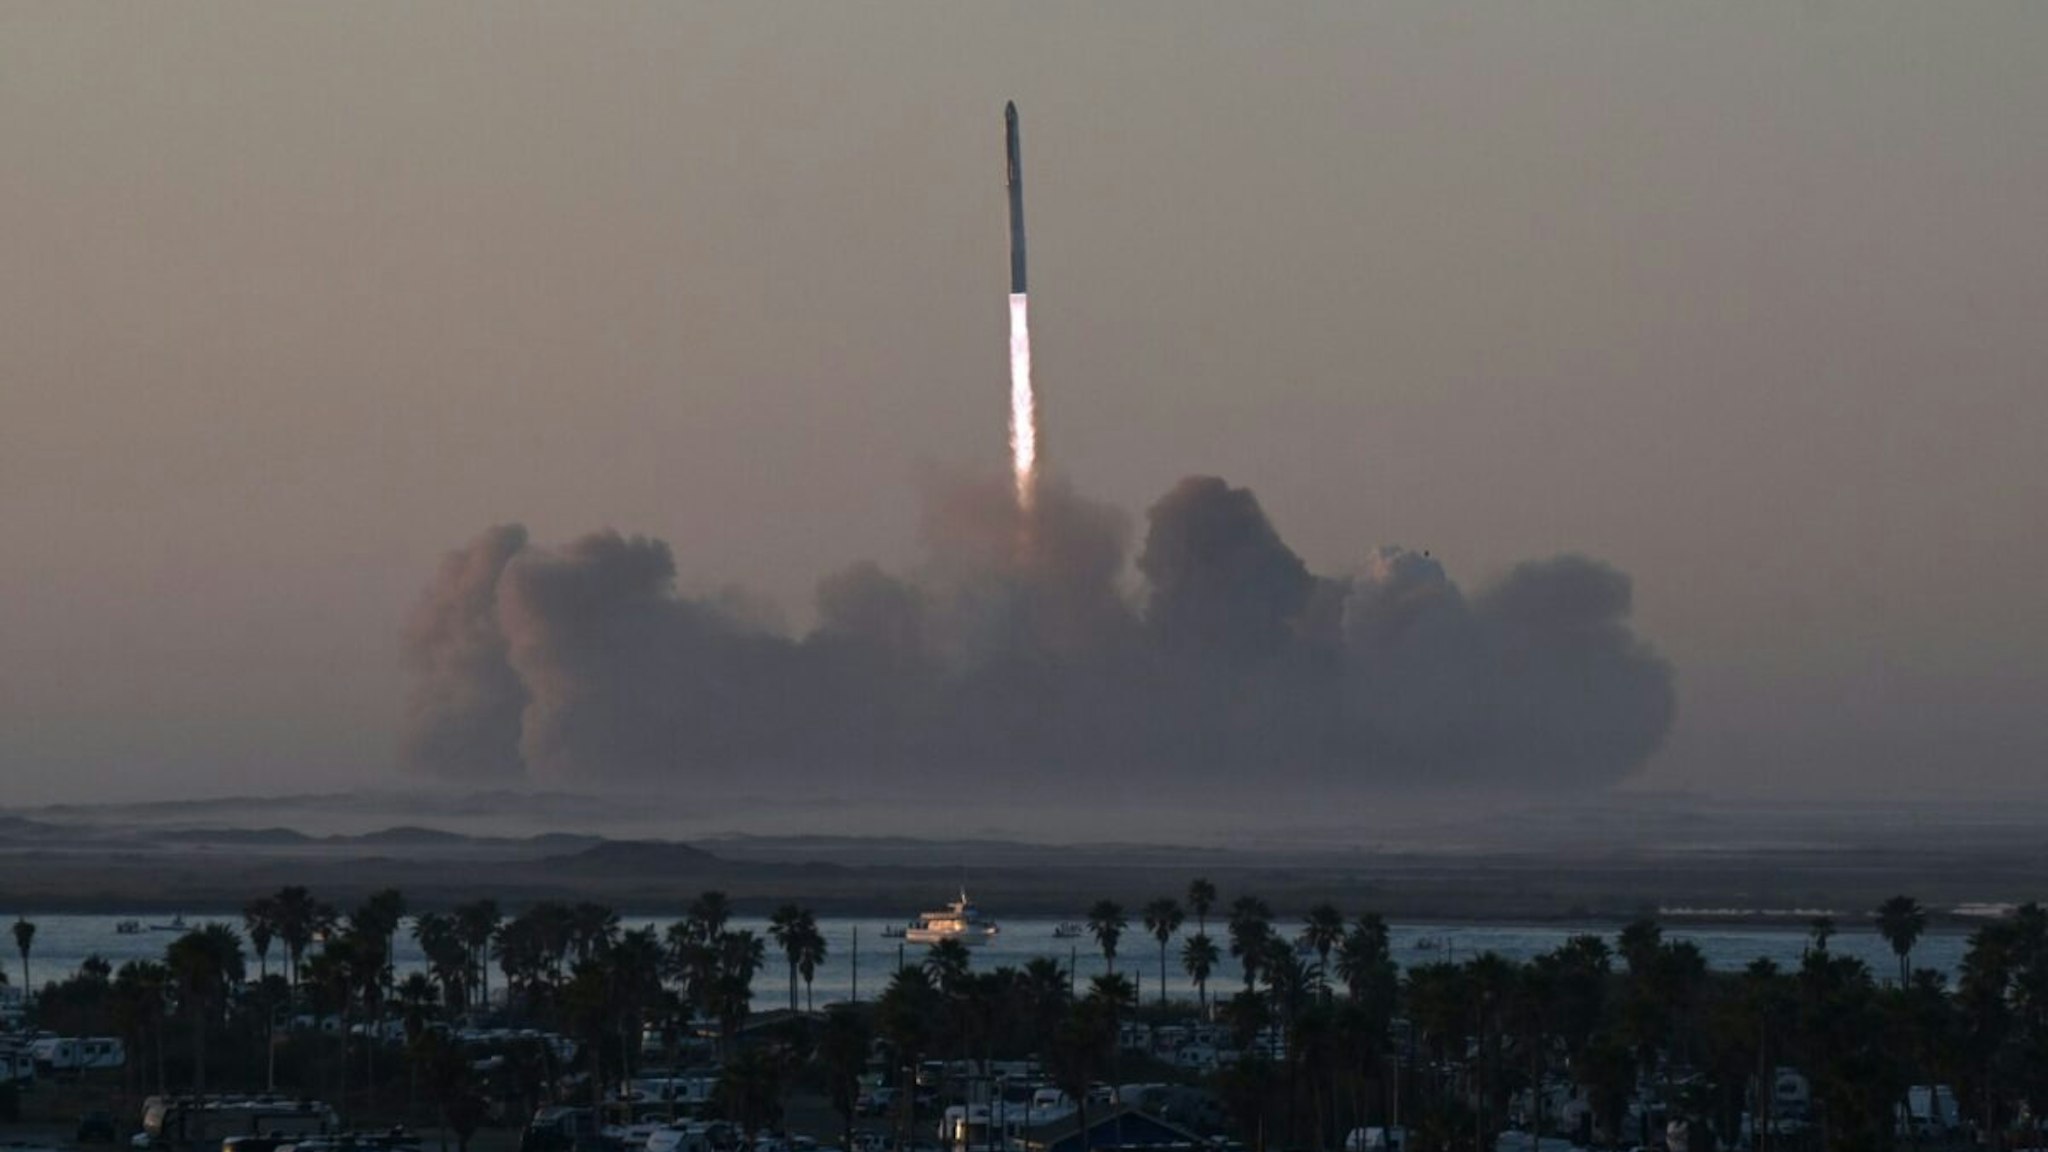 SpaceX's Starship rocket launches from Starbase during its second test flight in Boca Chica, Texas, on November 18, 2023. SpaceX on November 18, 2023, carried out the second test launch of Starship, the largest rocket ever built that Elon Musk hopes will one day colonize Mars, while NASA awaits a modified version to land humans on the Moon.